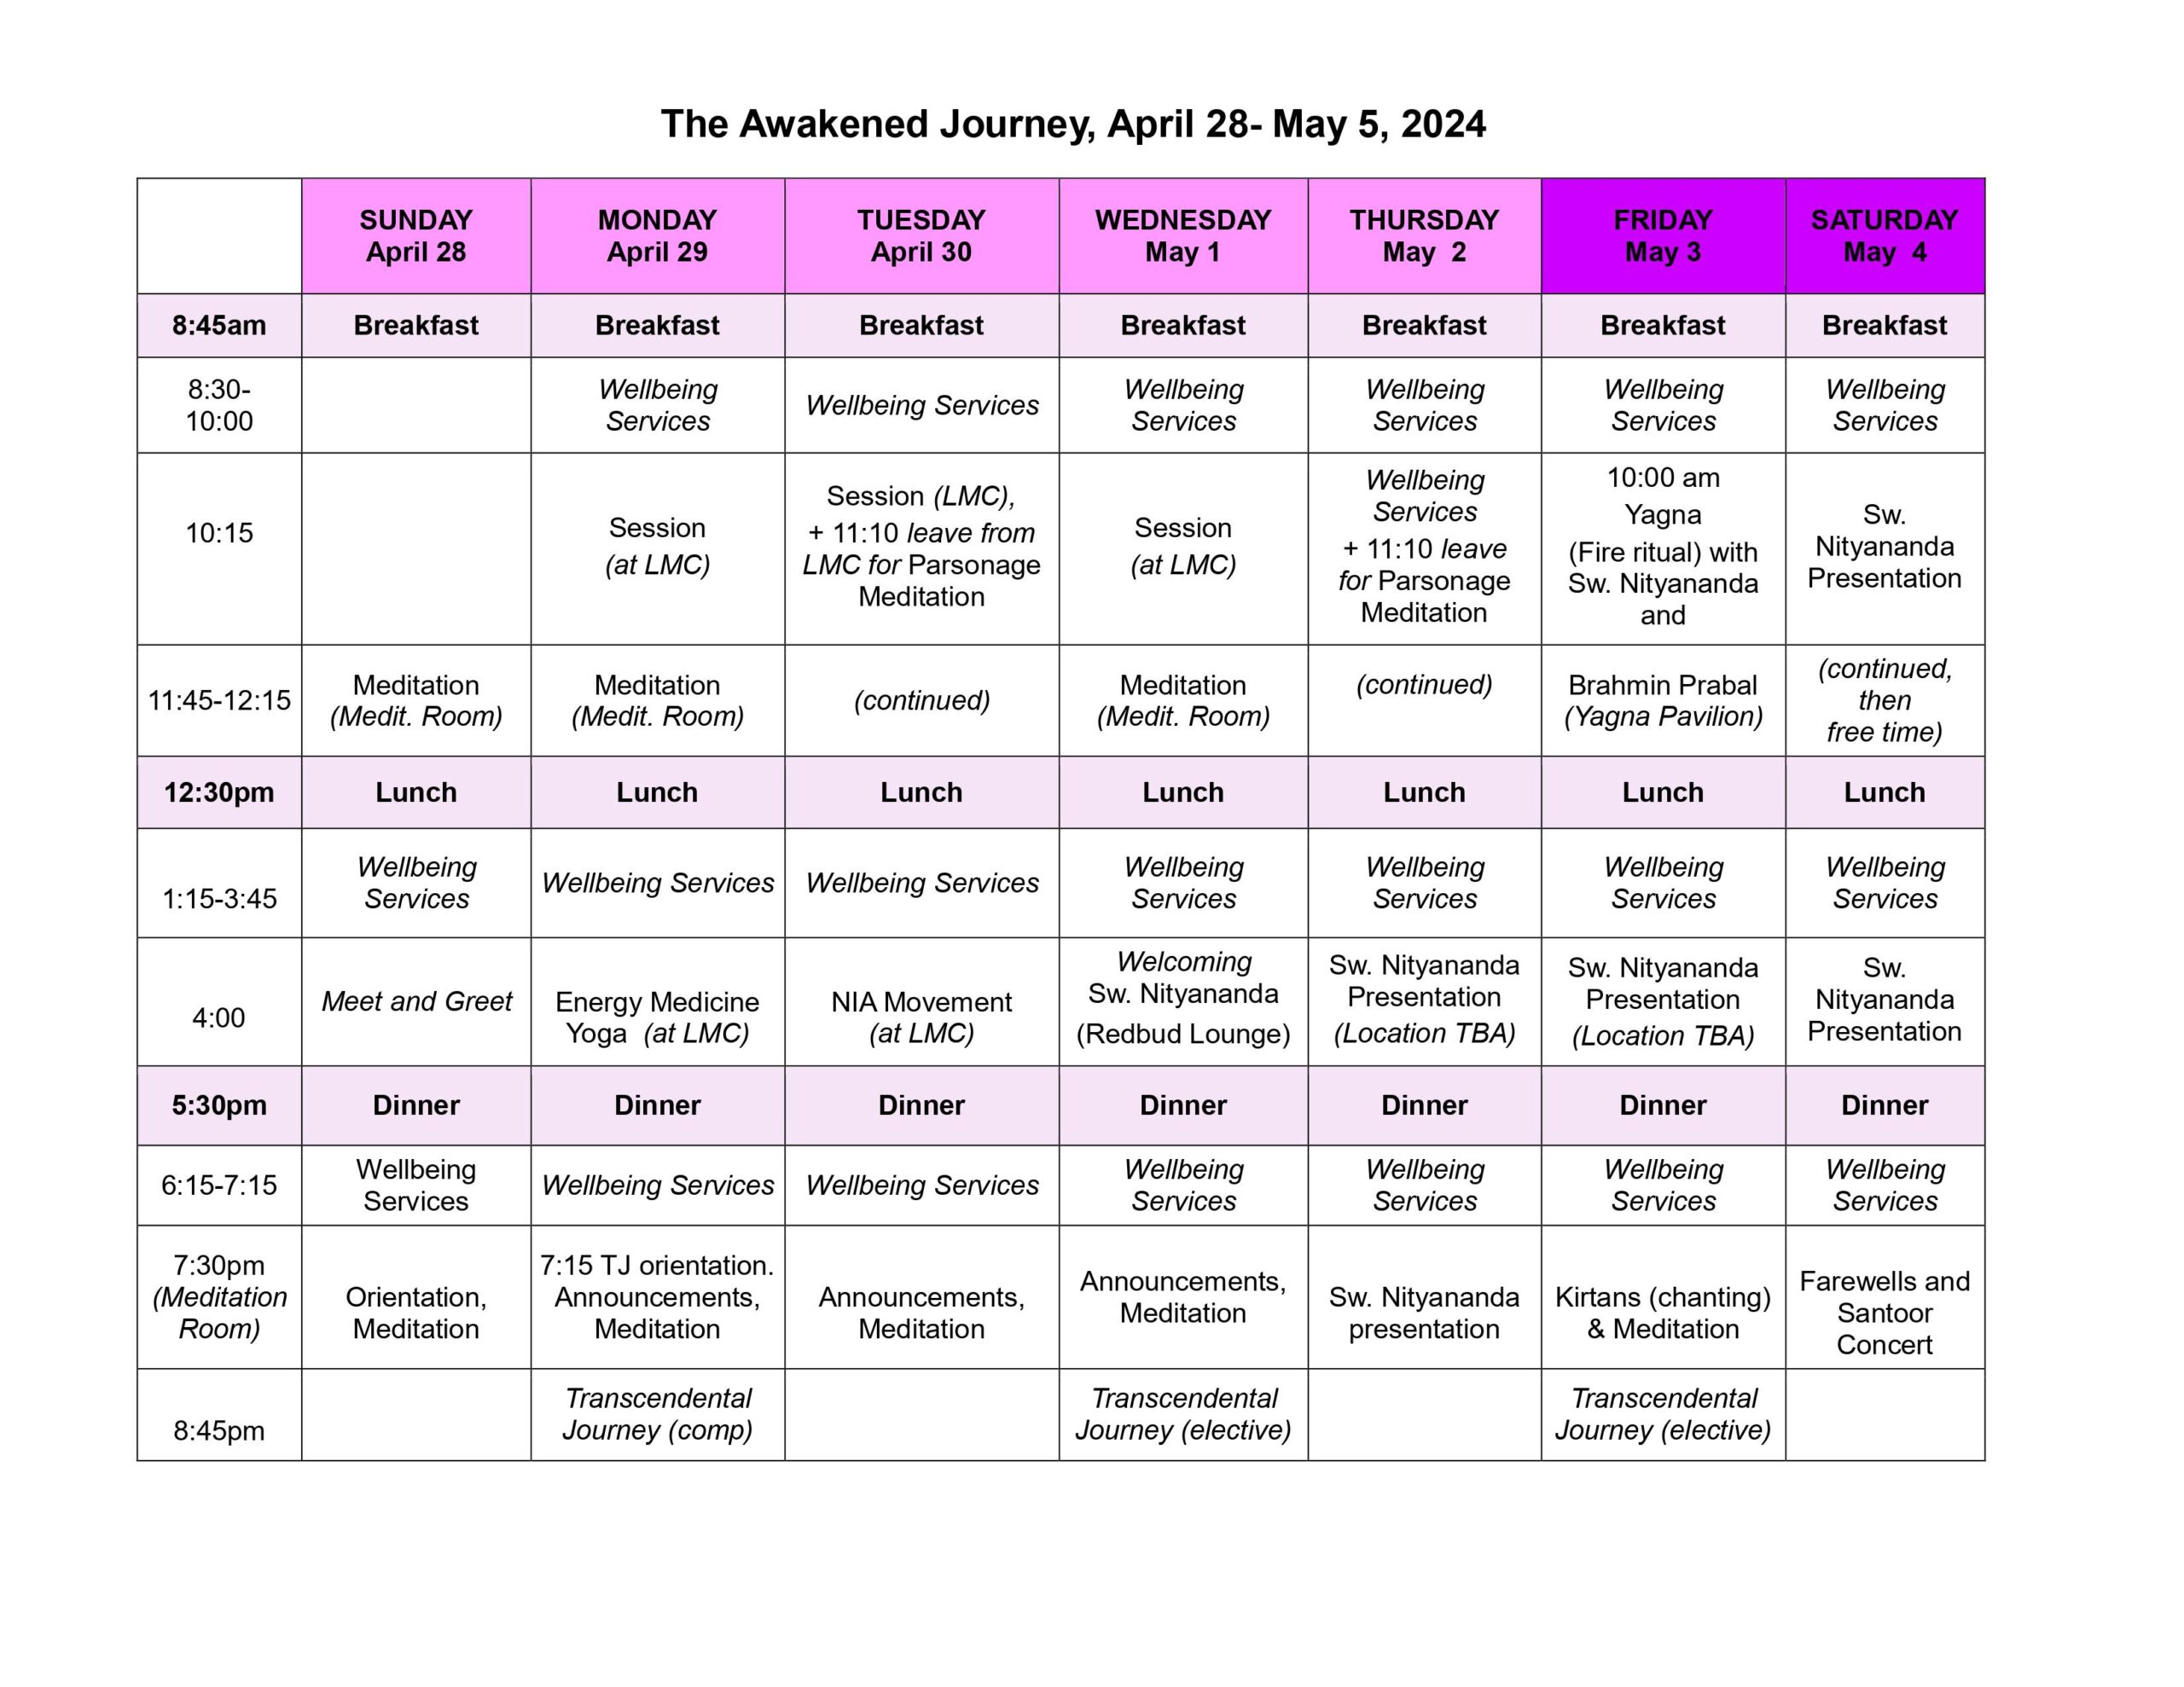 Guest schedule for The Awakened Journey Retreat.